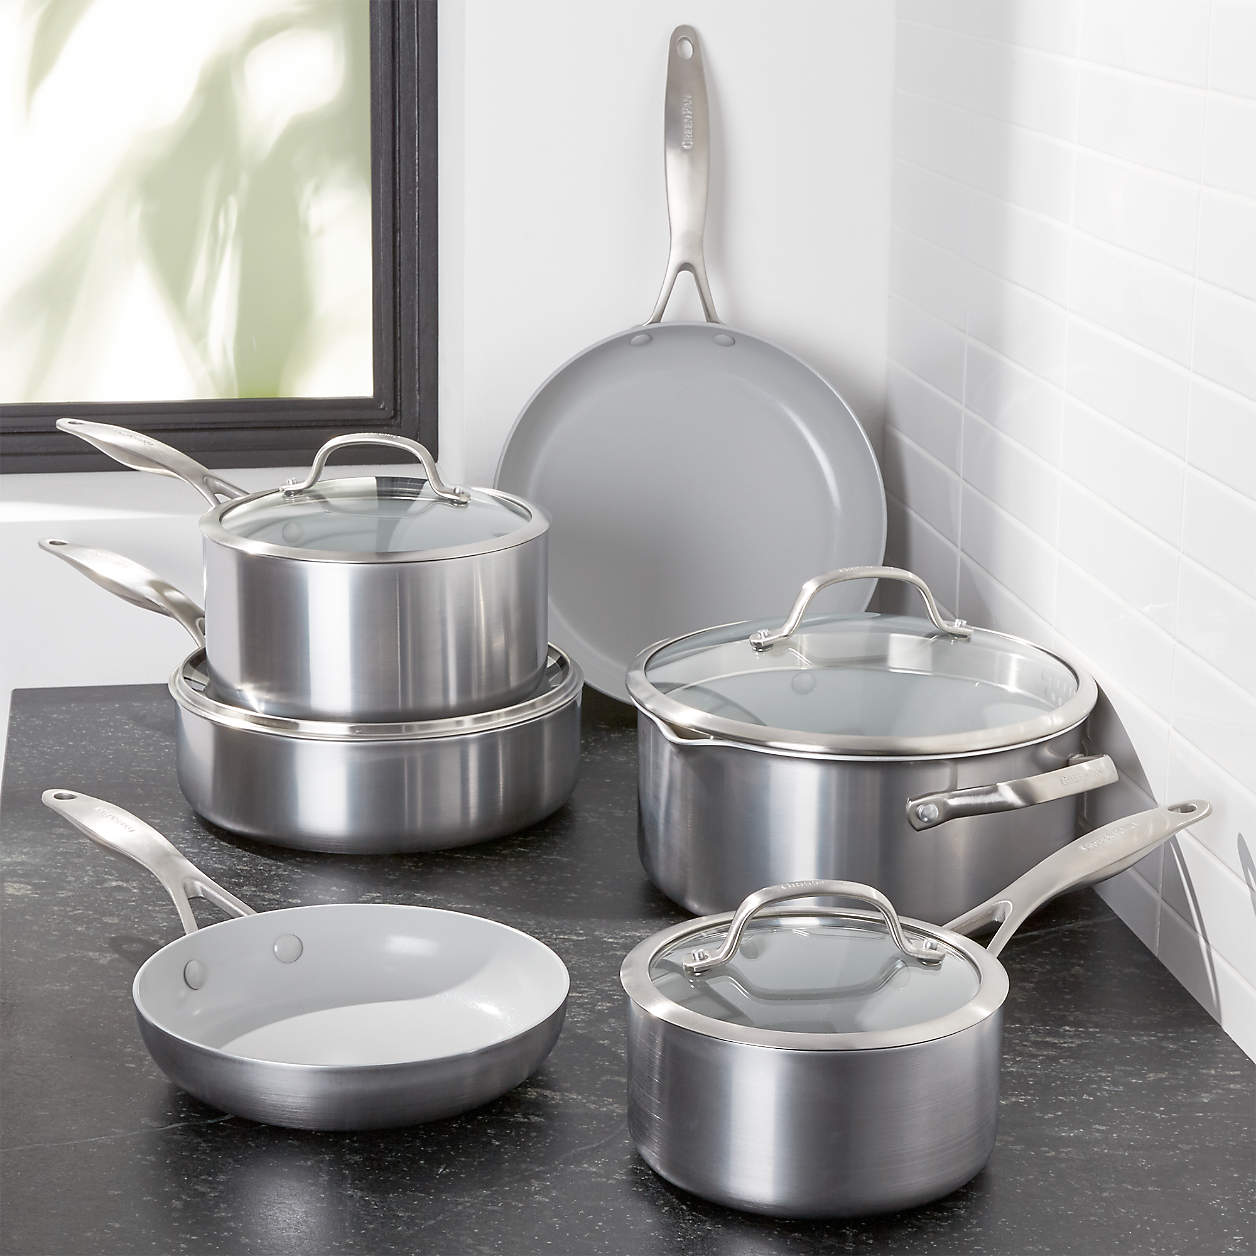 cookware stacked on grey countertop with white tile background.